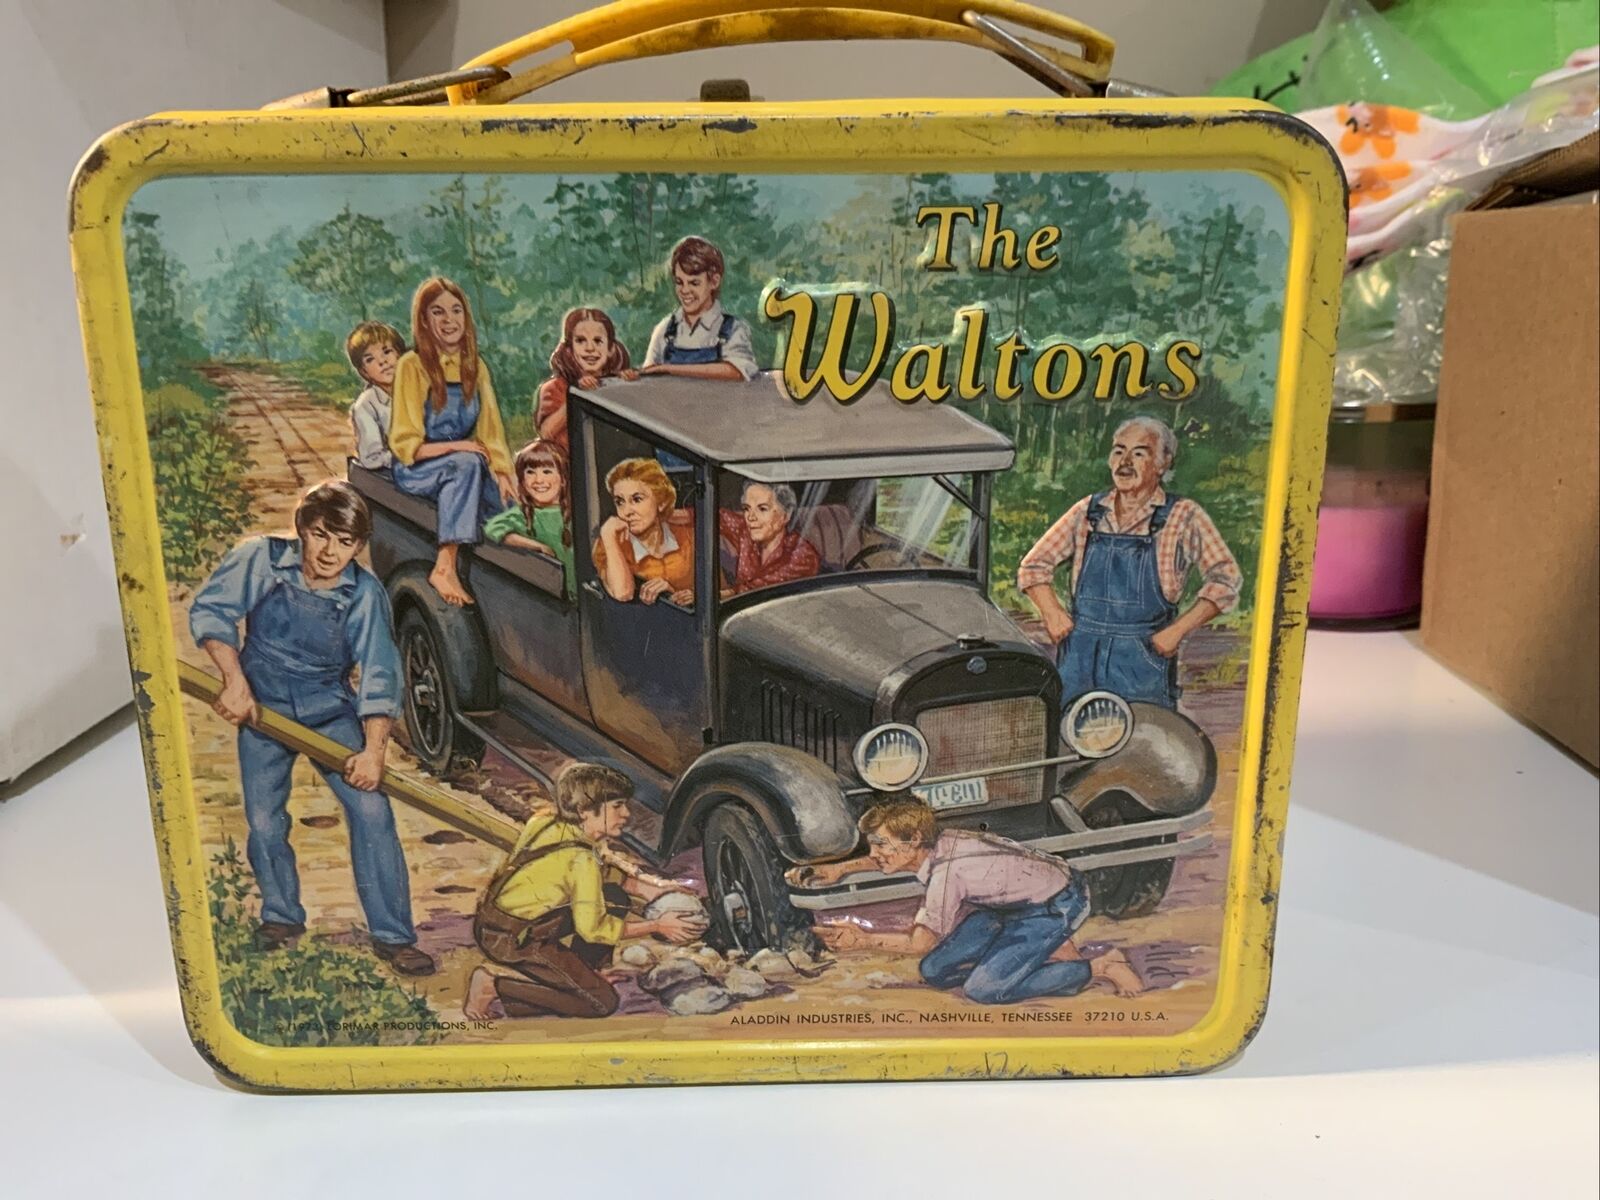 VINTAGE 1973 ALADDIN THE WALTONS TV SERIES YELLOW METAL LUNCH BOX No Thermos